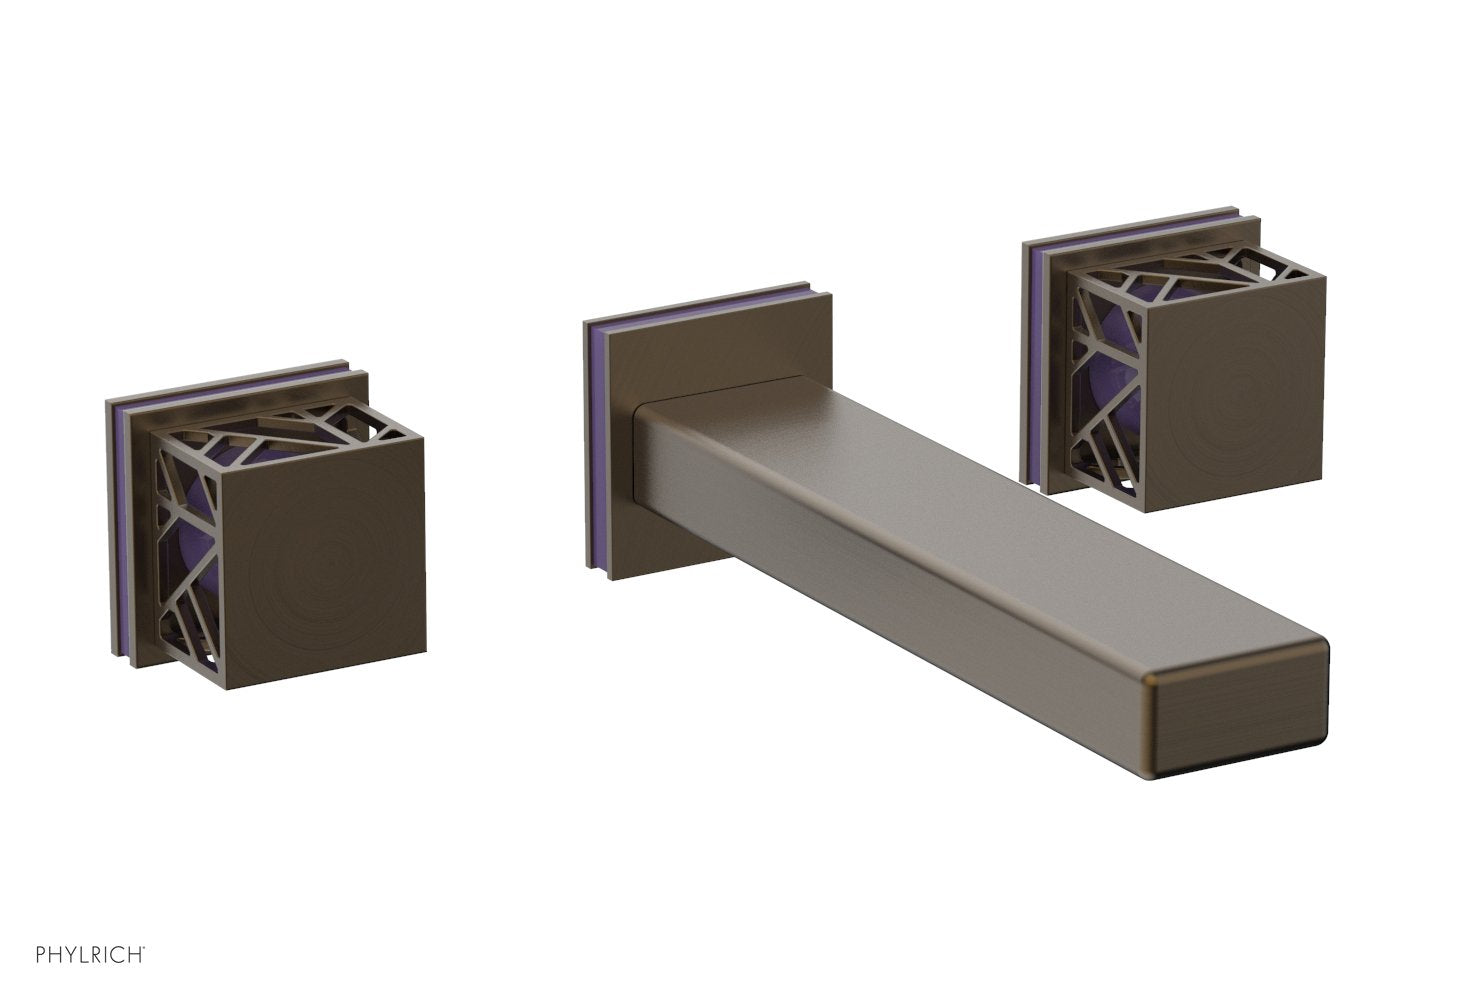 Phylrich JOLIE Wall Lavatory Set - Square Handles with "Purple" Accents